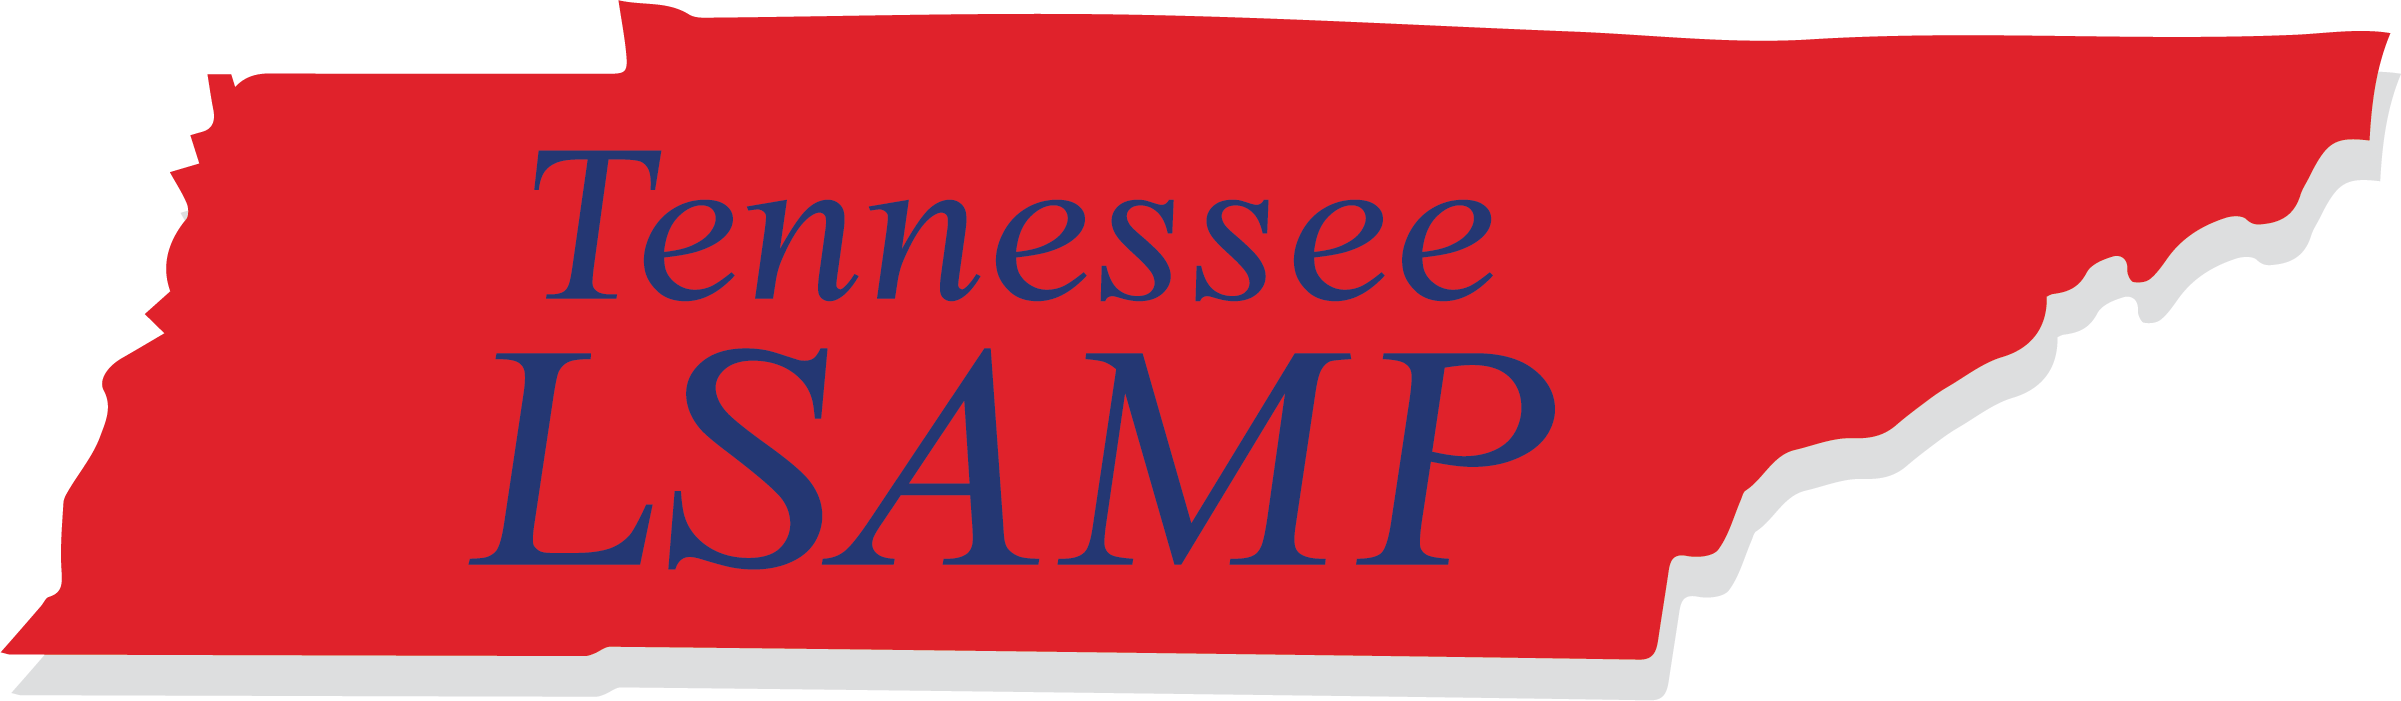 Tennessee Louis Stokes Alliance for Minority Participation (TLSAMP) logo